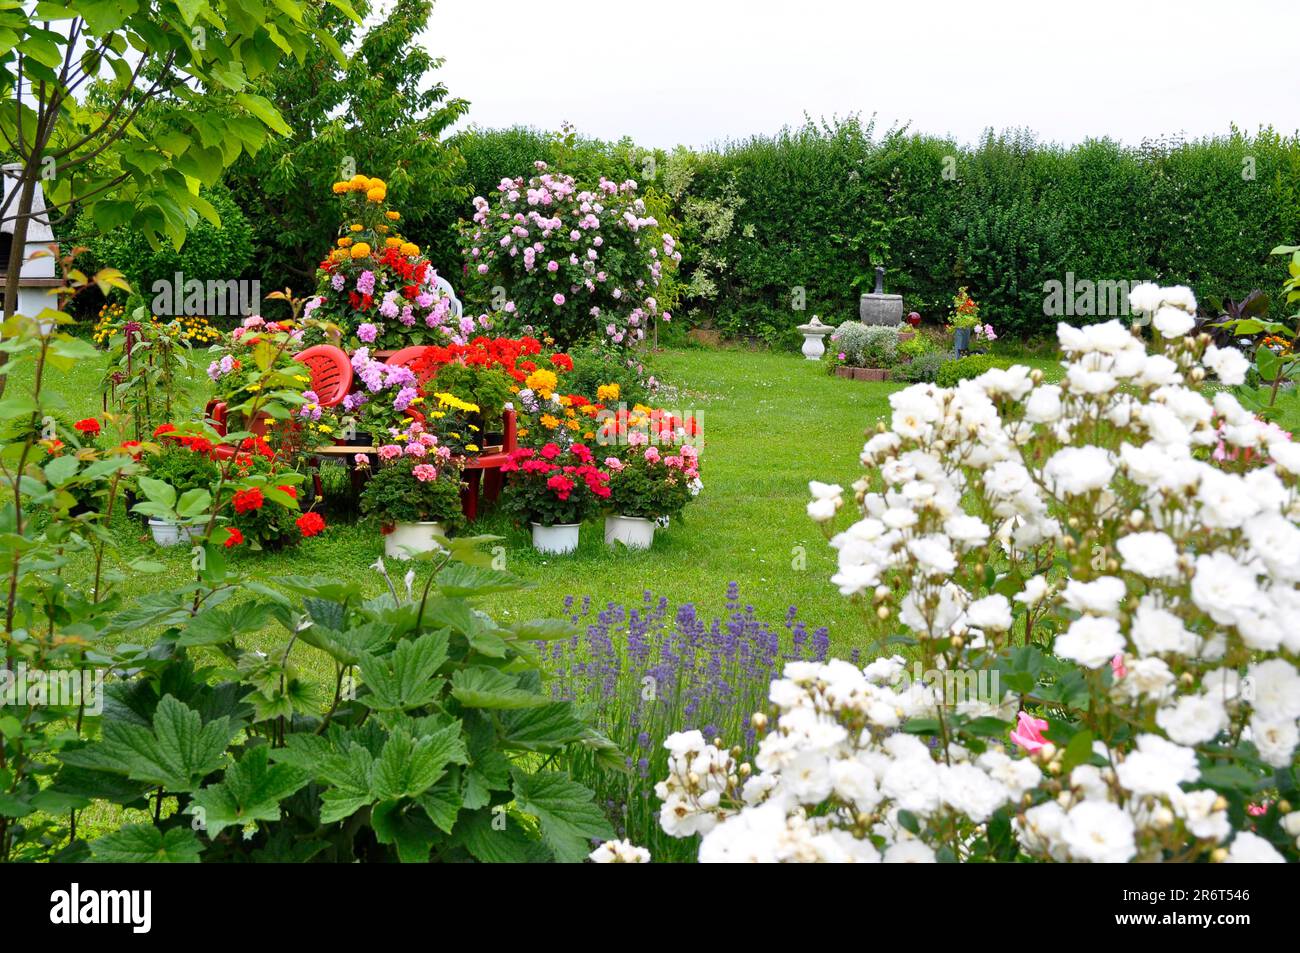 Pyramid of flowers in the garden, flowerpot with flowers, lawn, white roses in the garden Stock Photo